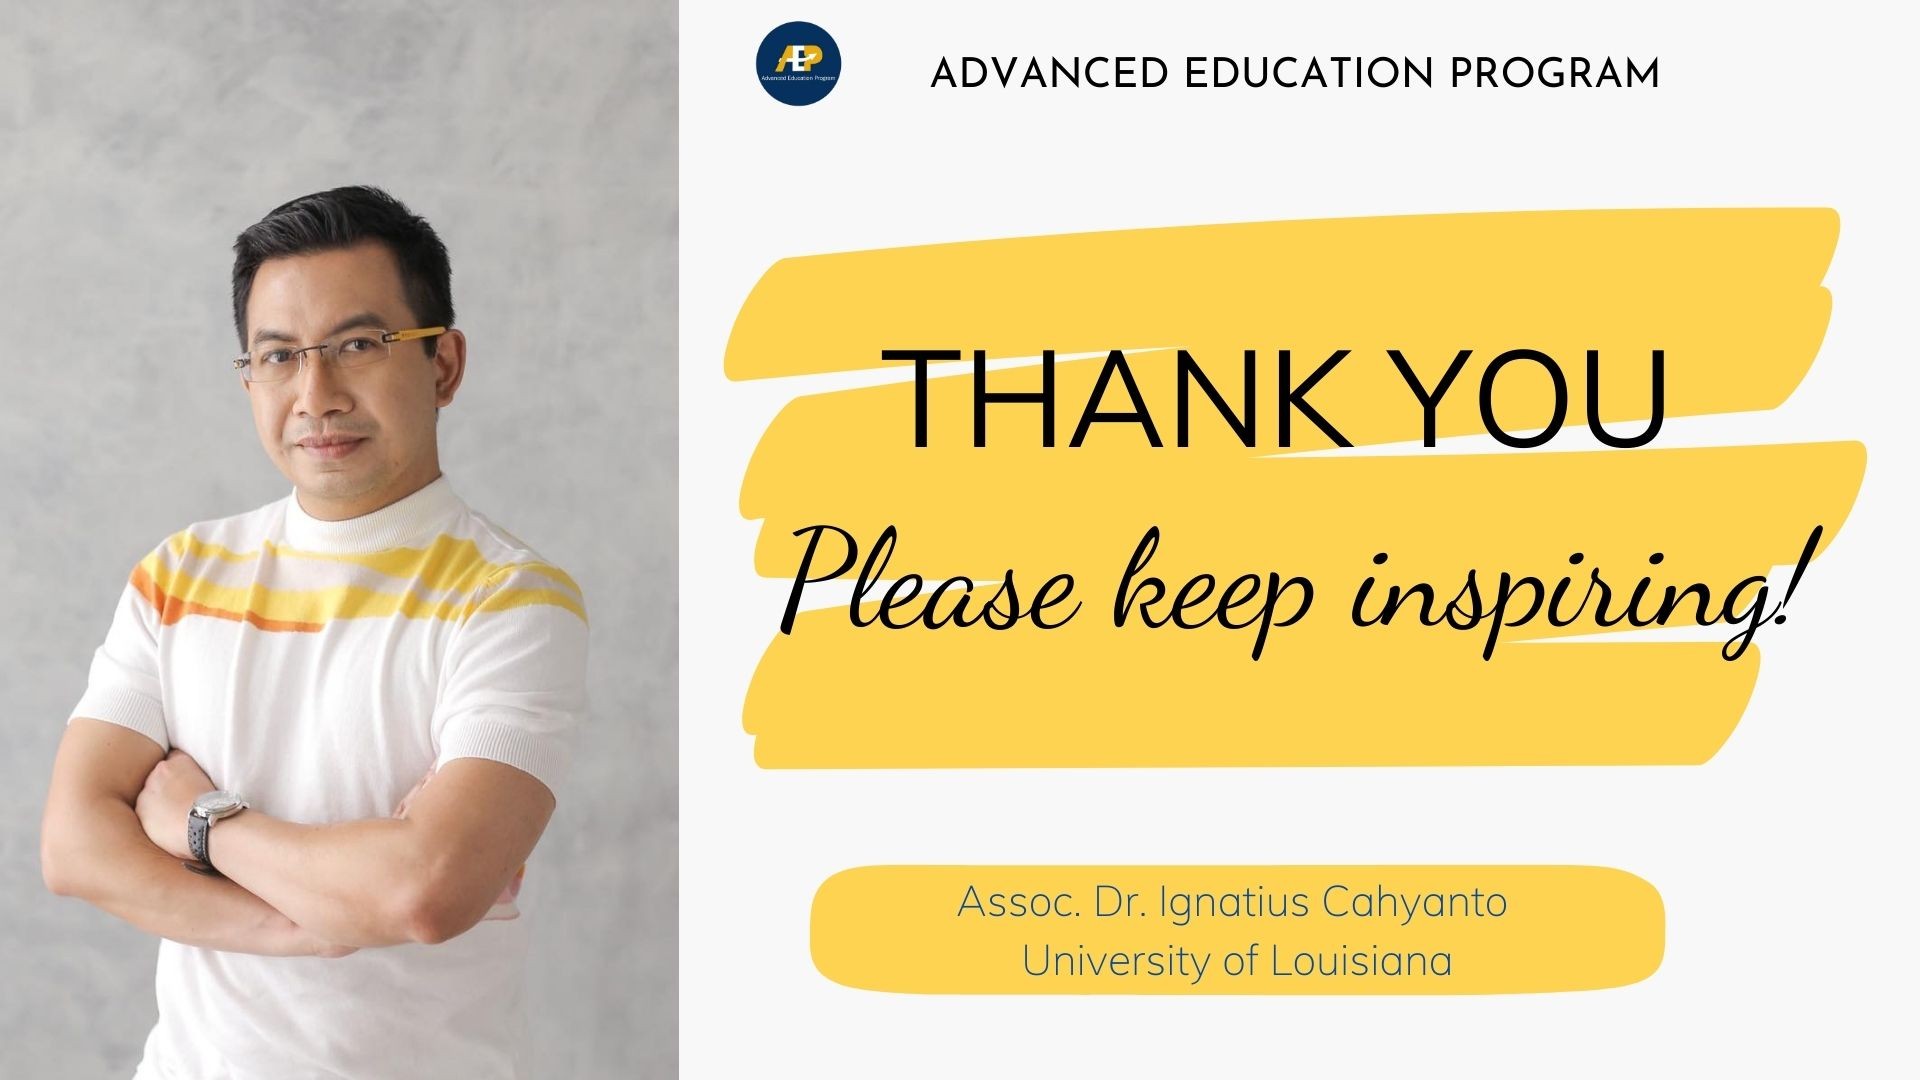 Assoc. Dr. Ignatius Cahyanto, Thank you for everything!